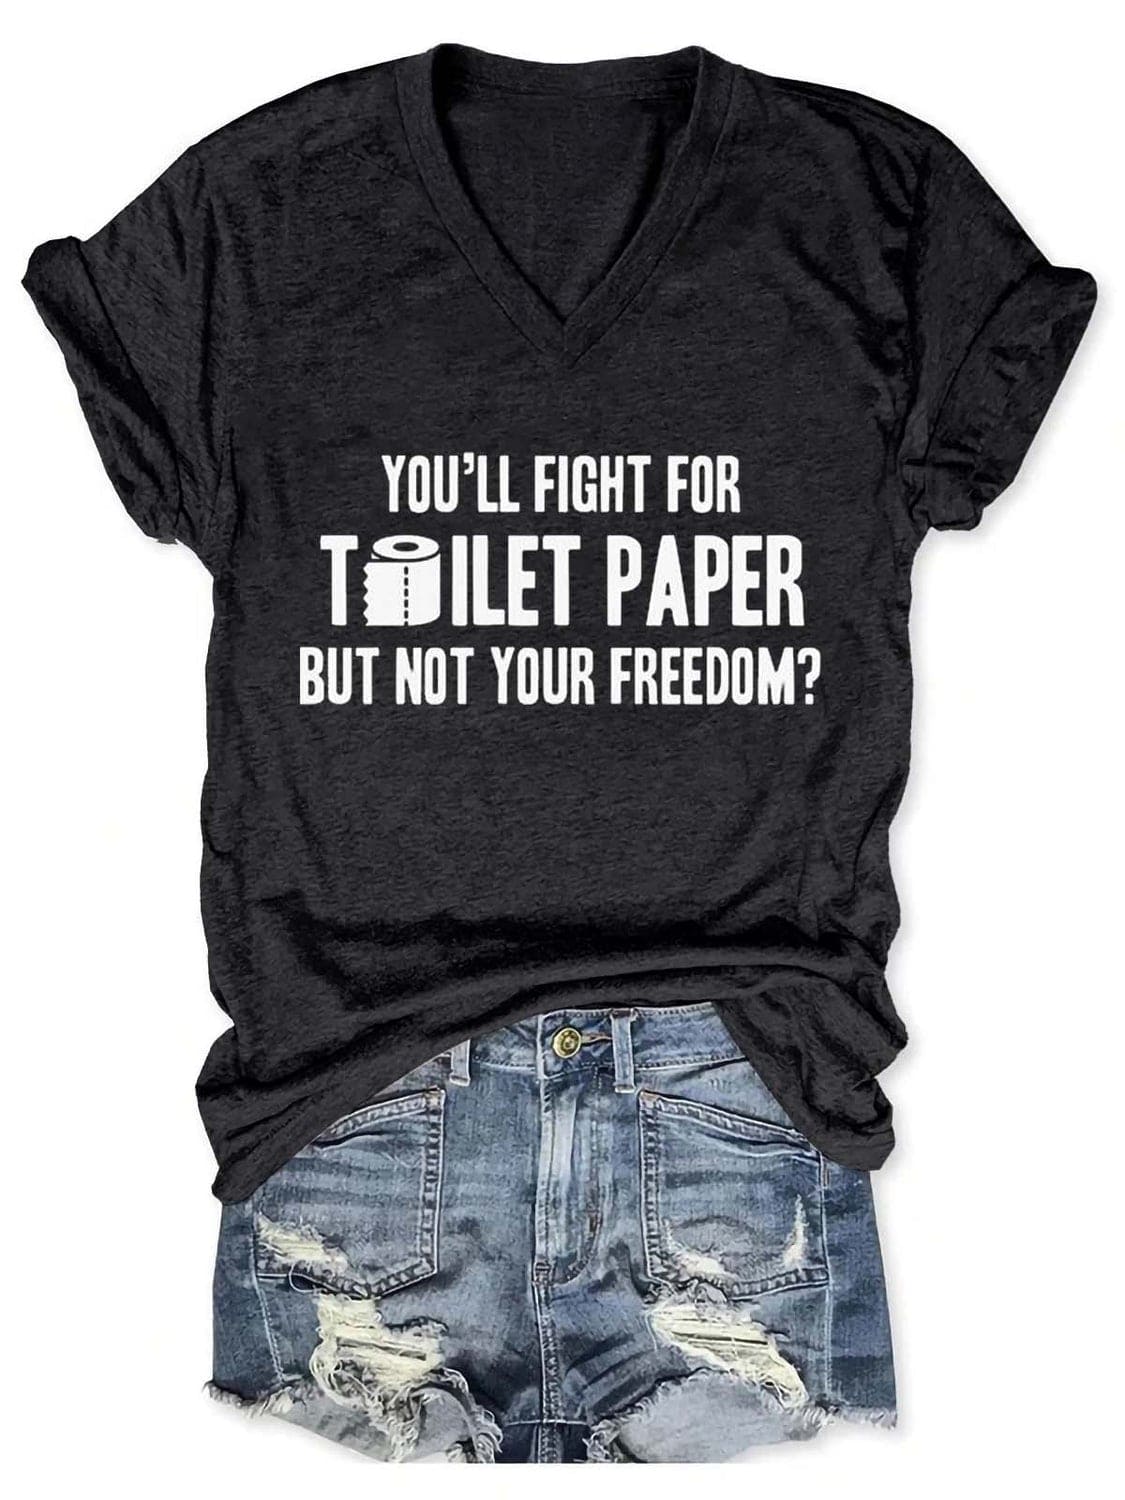 You'll fight for toilet paper but not your freedom?